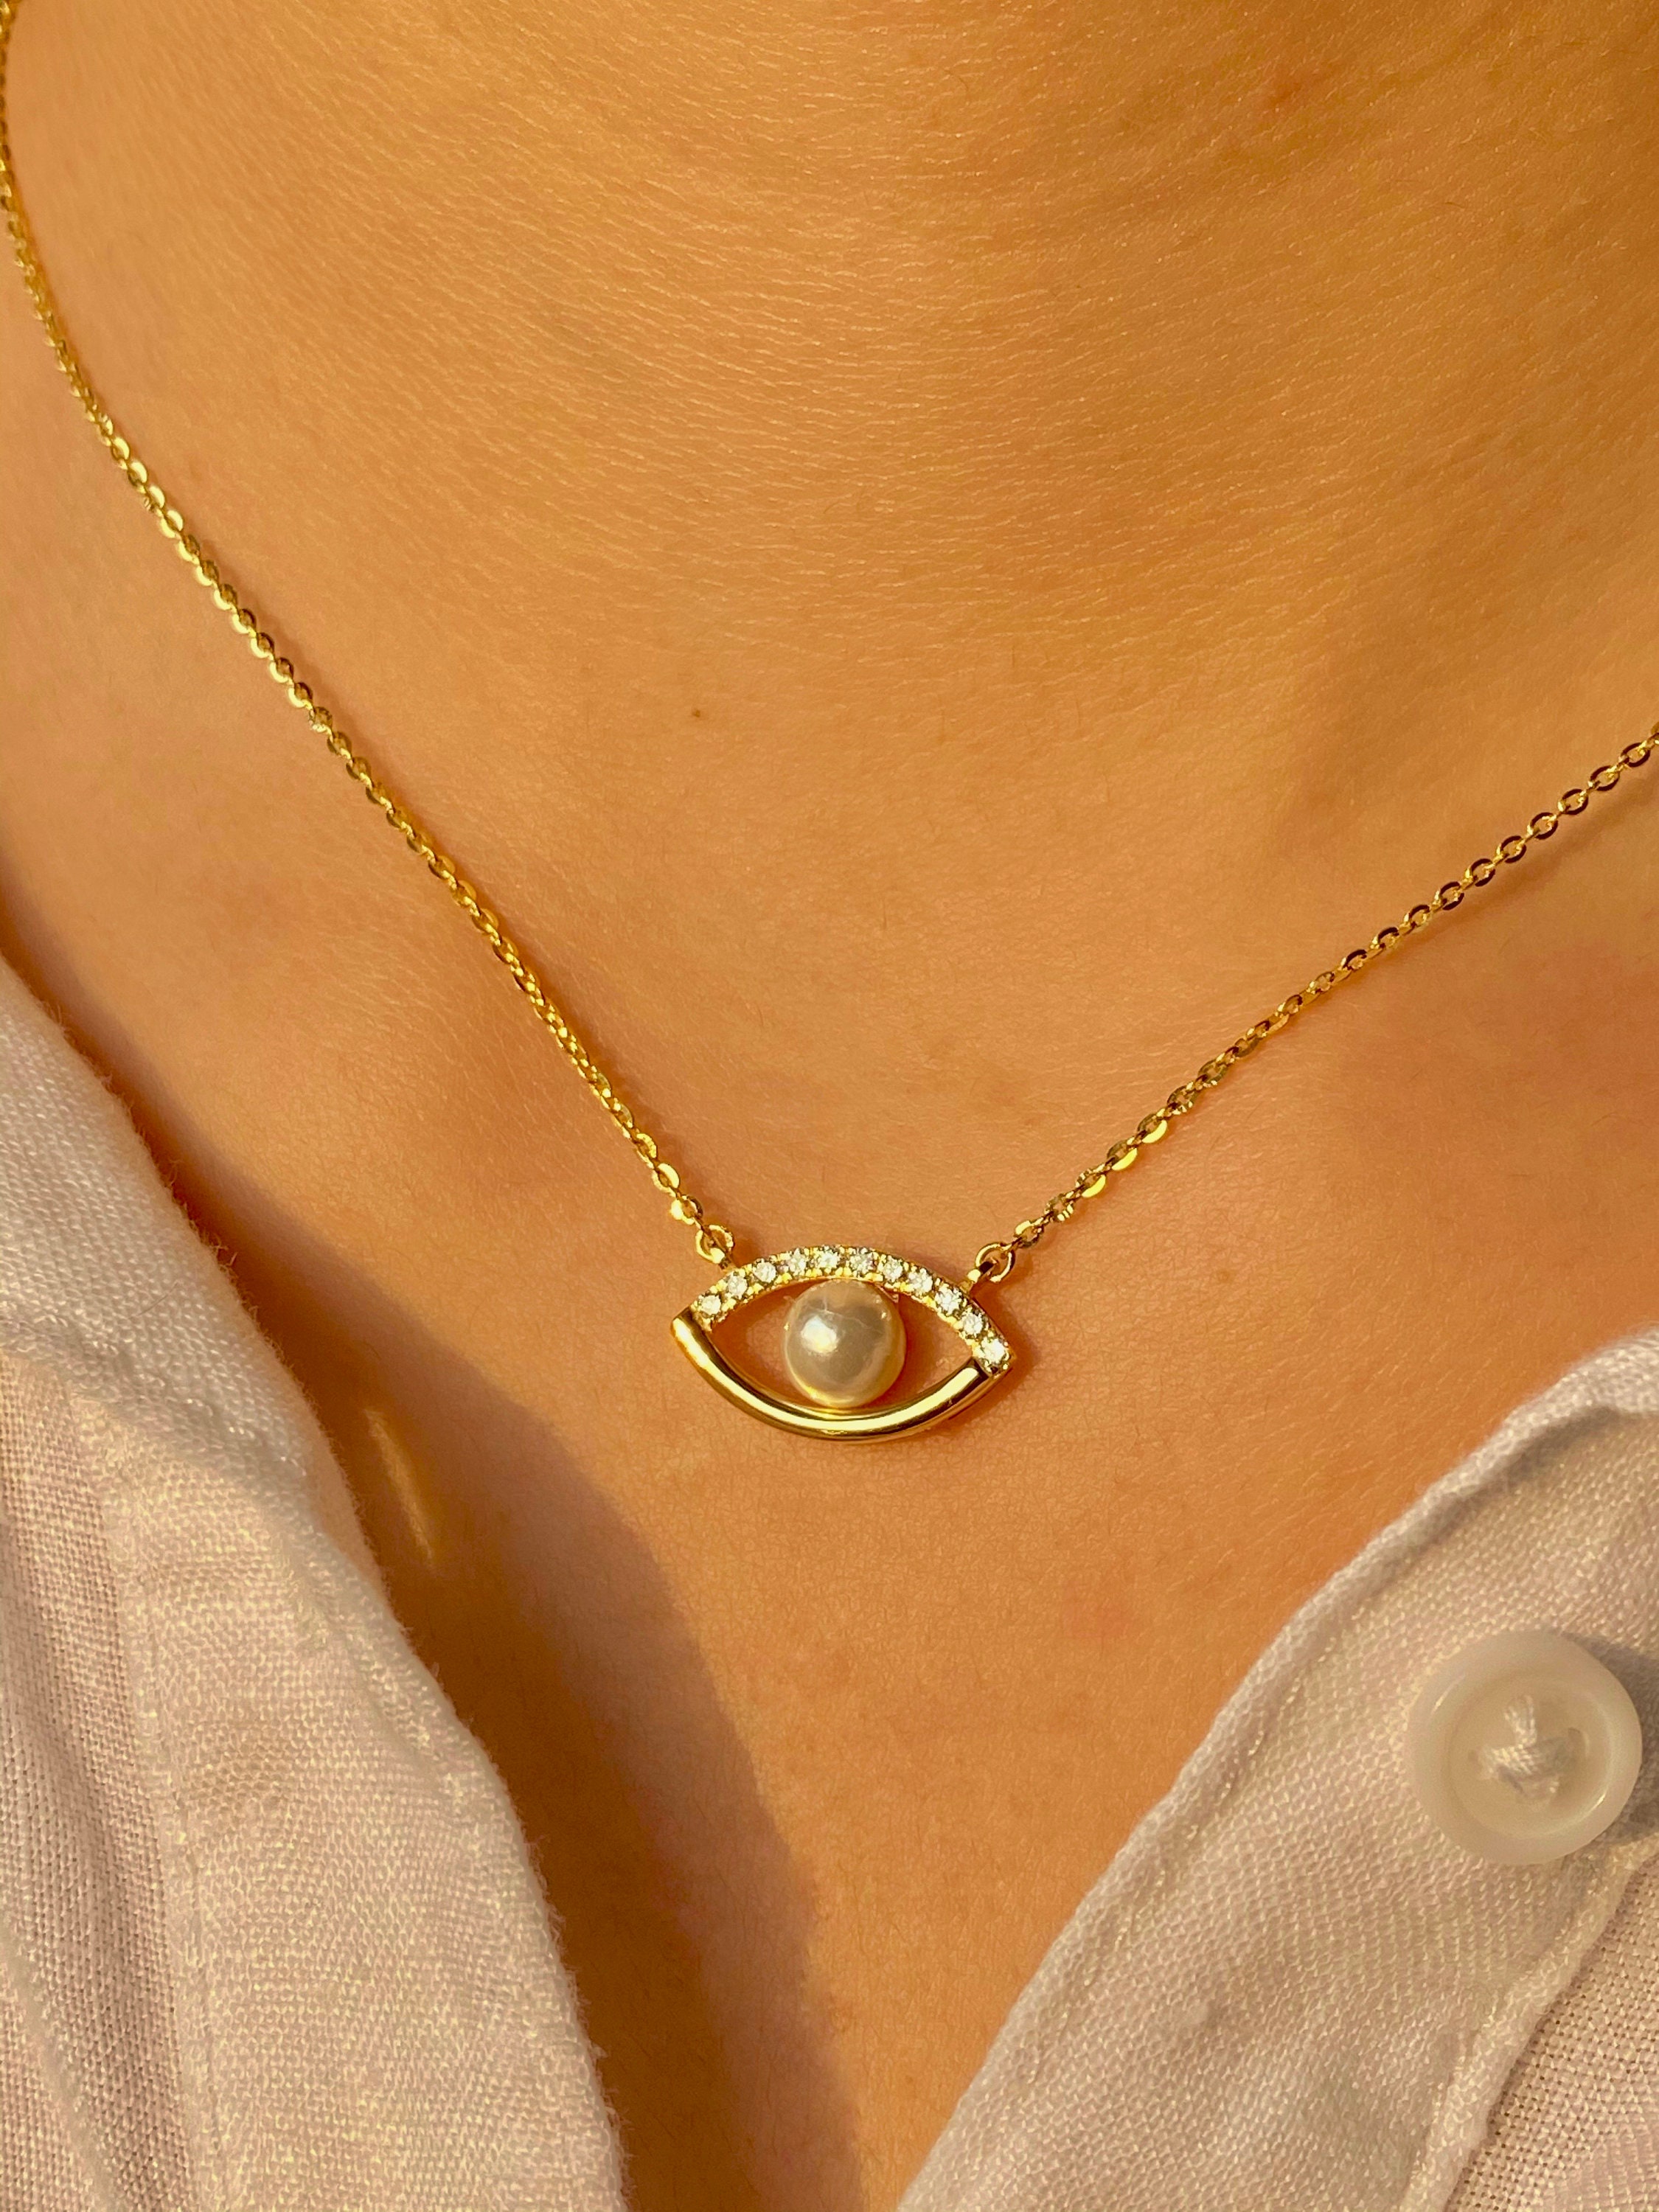 Evil Eye Pearl Necklace 14 Kt Solid Gold Diamond Necklace | Etsy